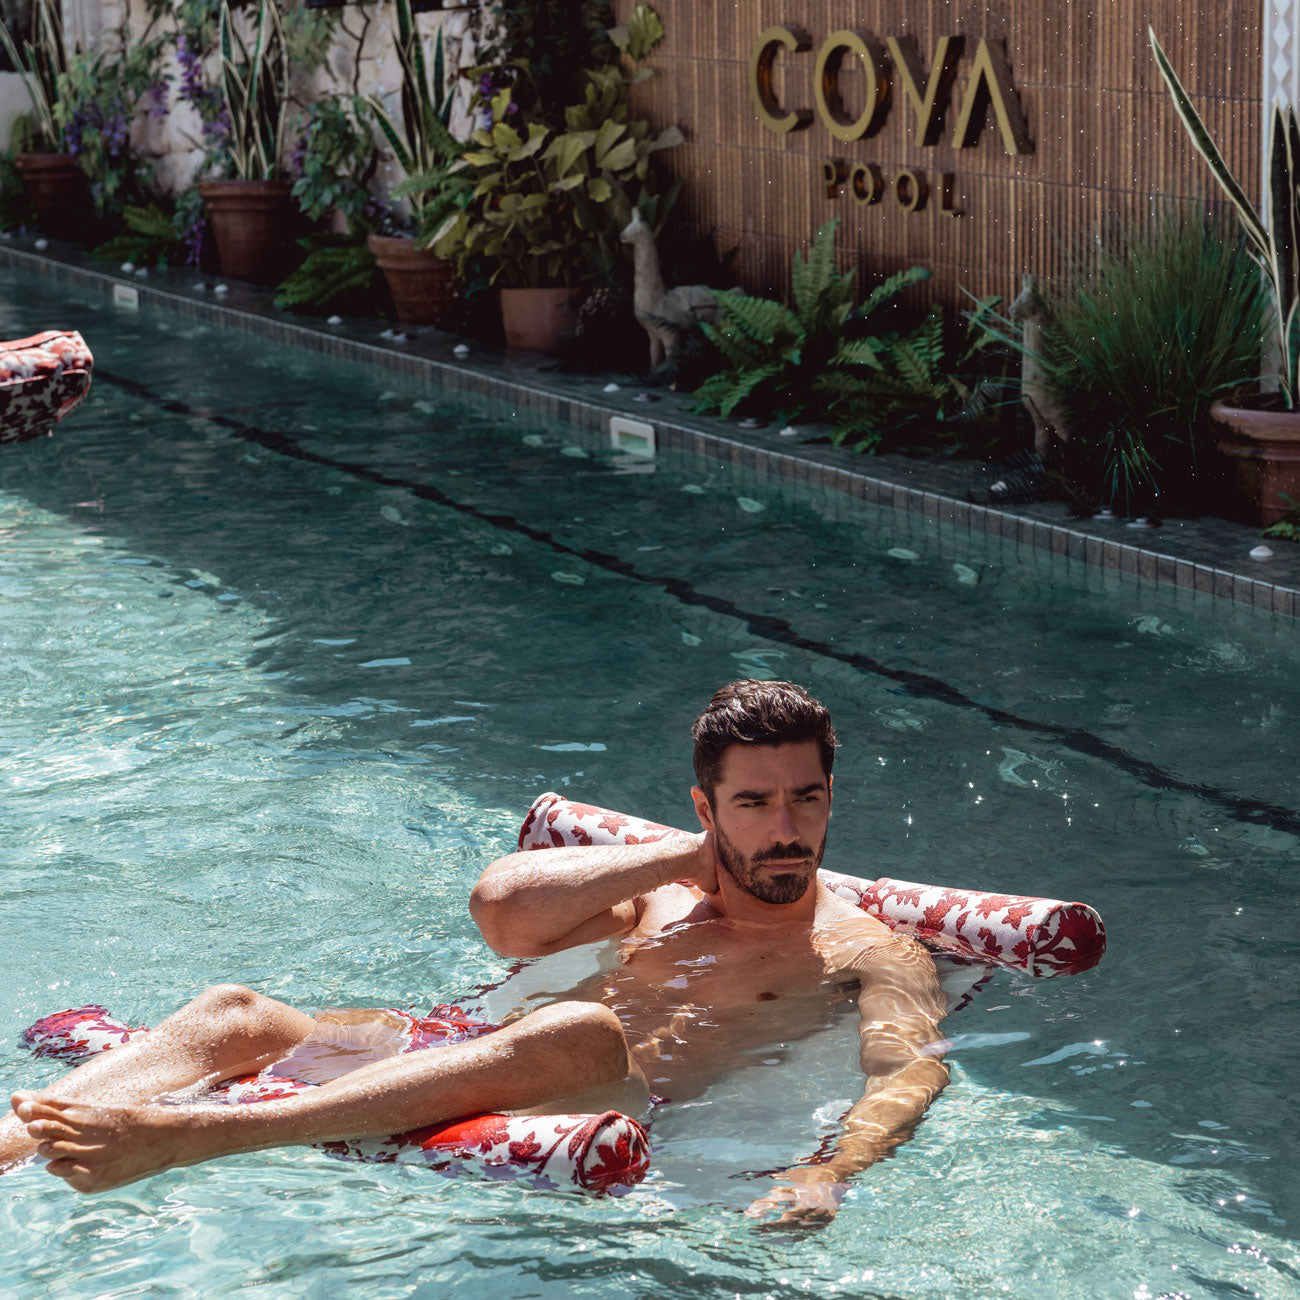 A man floating in a luxury pool float hammock at the Coya pool in Marbella.